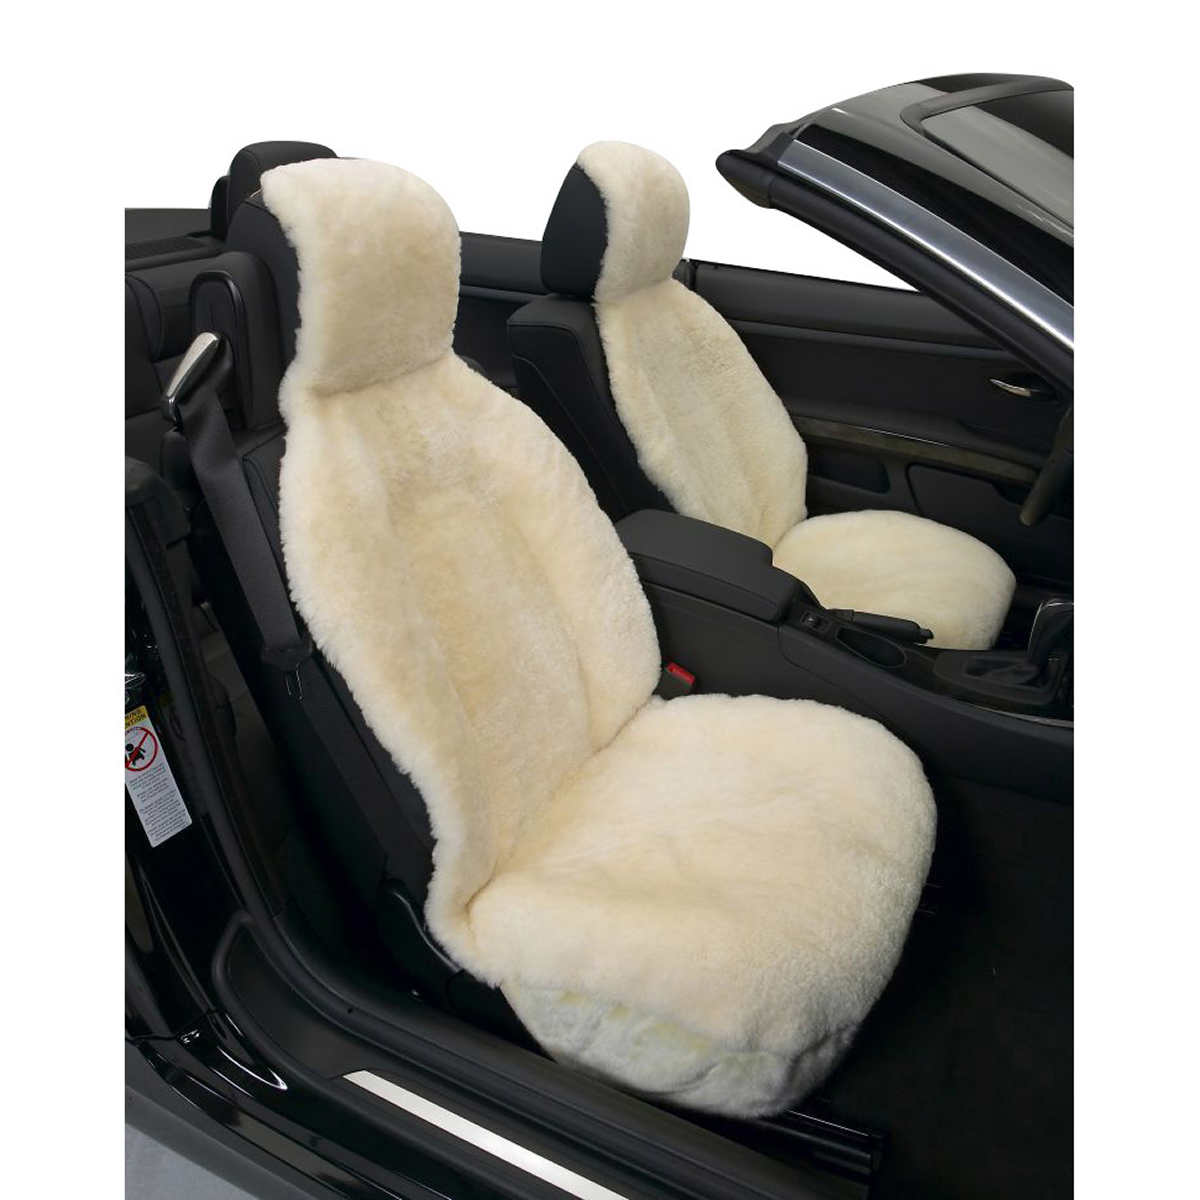 Sheepskin Car Seat Belt Pad,2 Soft Seat Belt Cover For Shoulder Pad Neck  Cushion Protector Car Accessories (off-white)